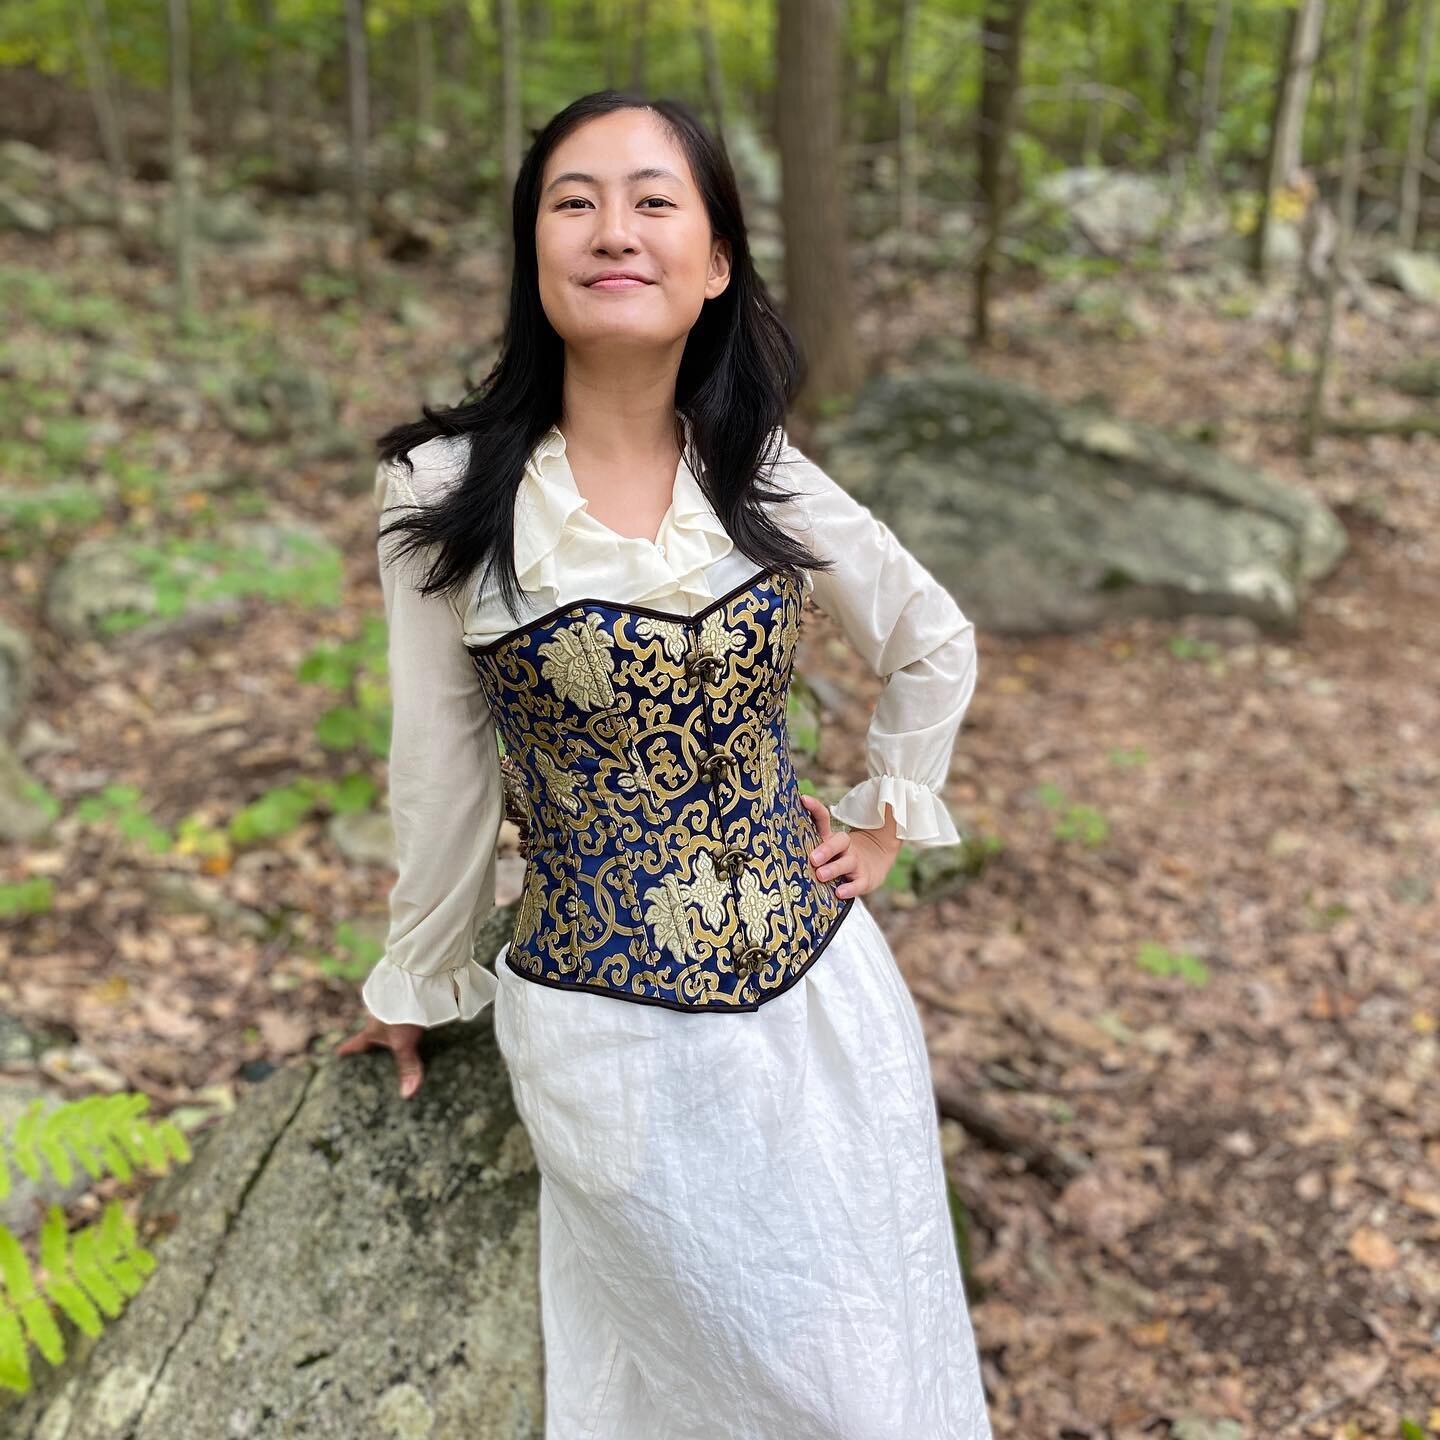 Cast me in your period films, I&rsquo;m ready. Turns out I look amazing in a crown, and am meh at archery.
#notrobinhood #kevinwas #corsetshurt #renfaire